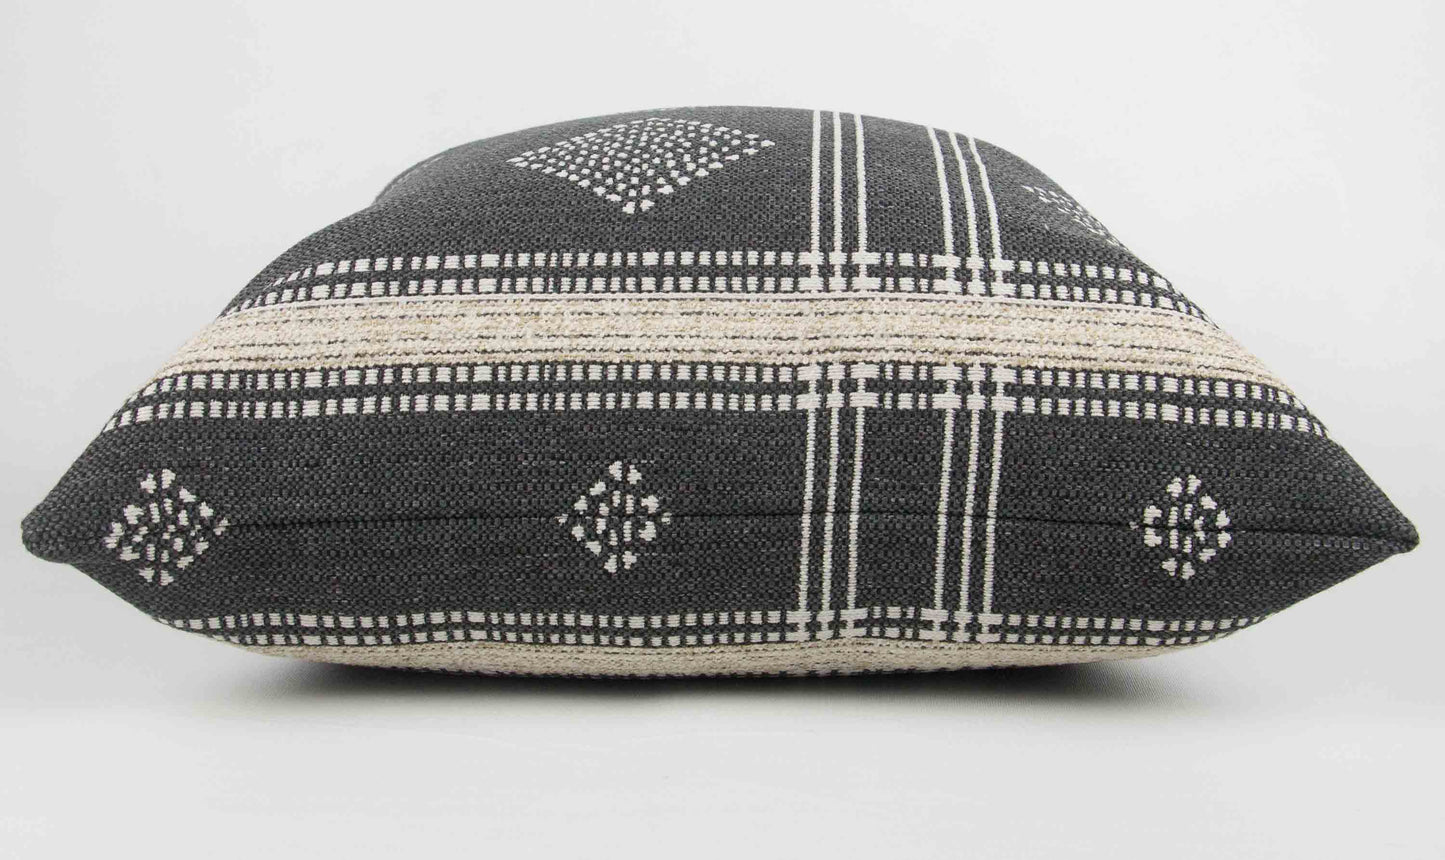 Charcoal Grey & Cream Tribal Pillow Cover 20x20", two stripes